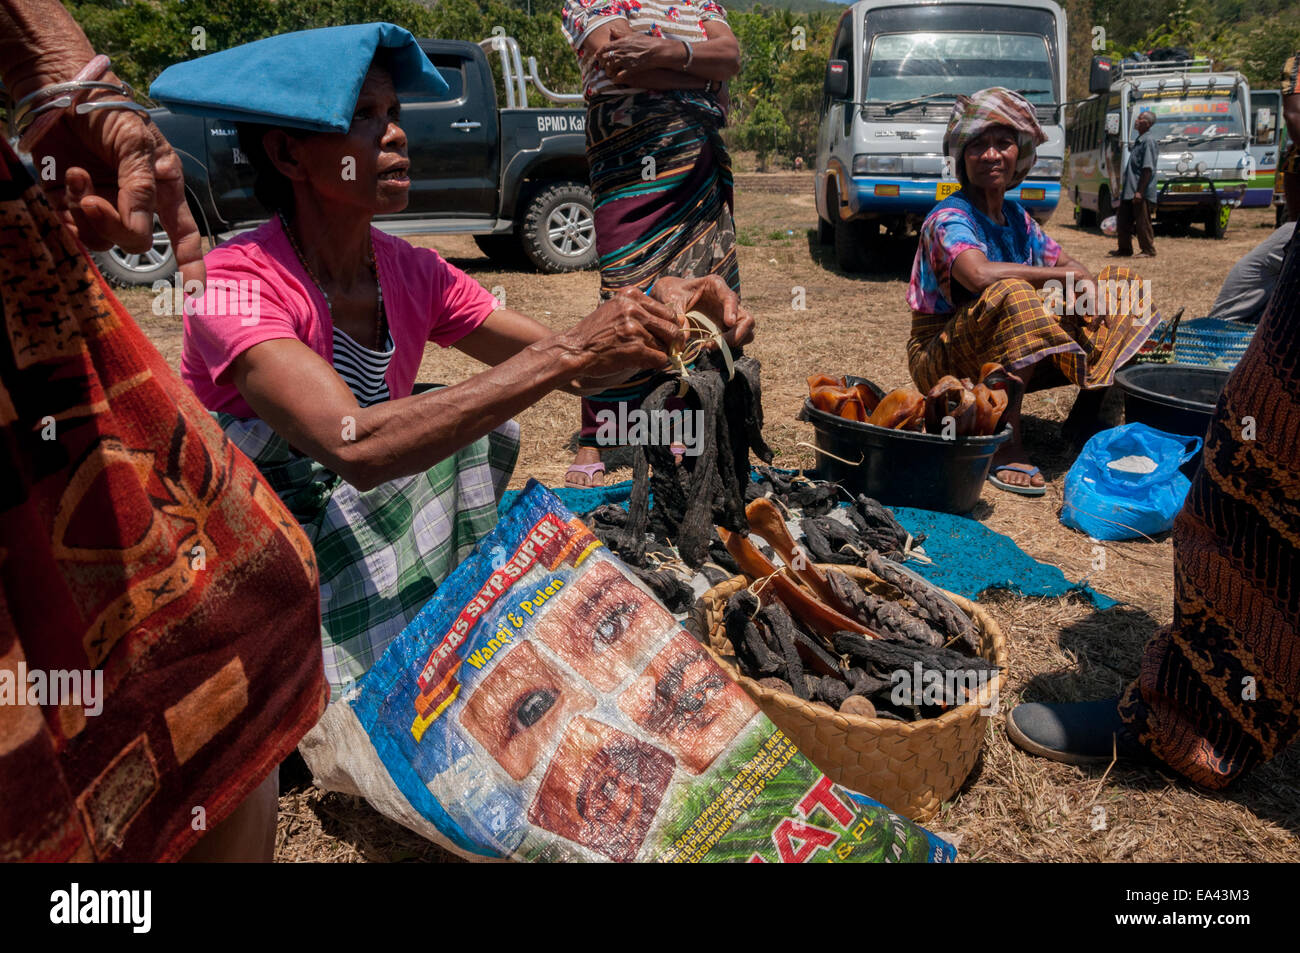 Women from Lamalera take part with their dried whale meats at a barter market in Lembata Island, Indonesia. Stock Photo